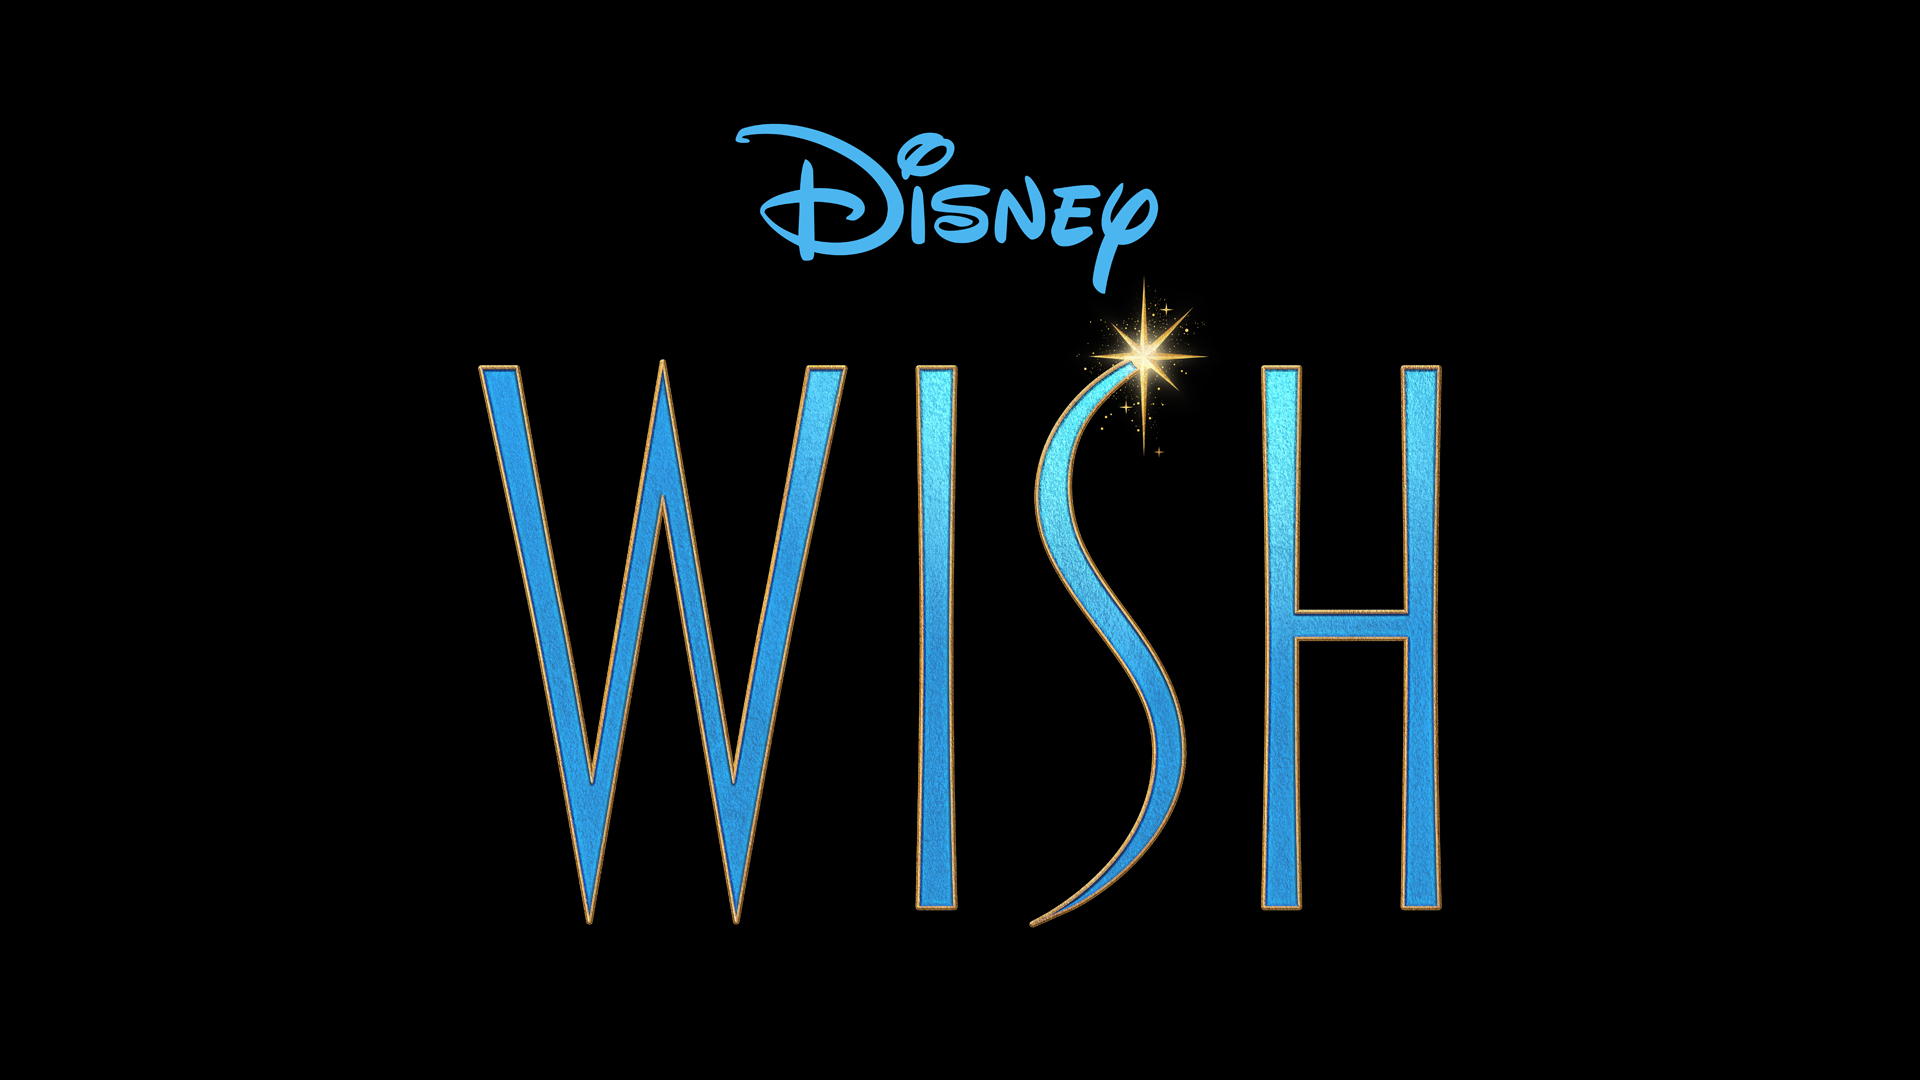 Disney Announces Ambitious Epic ‘Wish’ As Its Next Animated Film